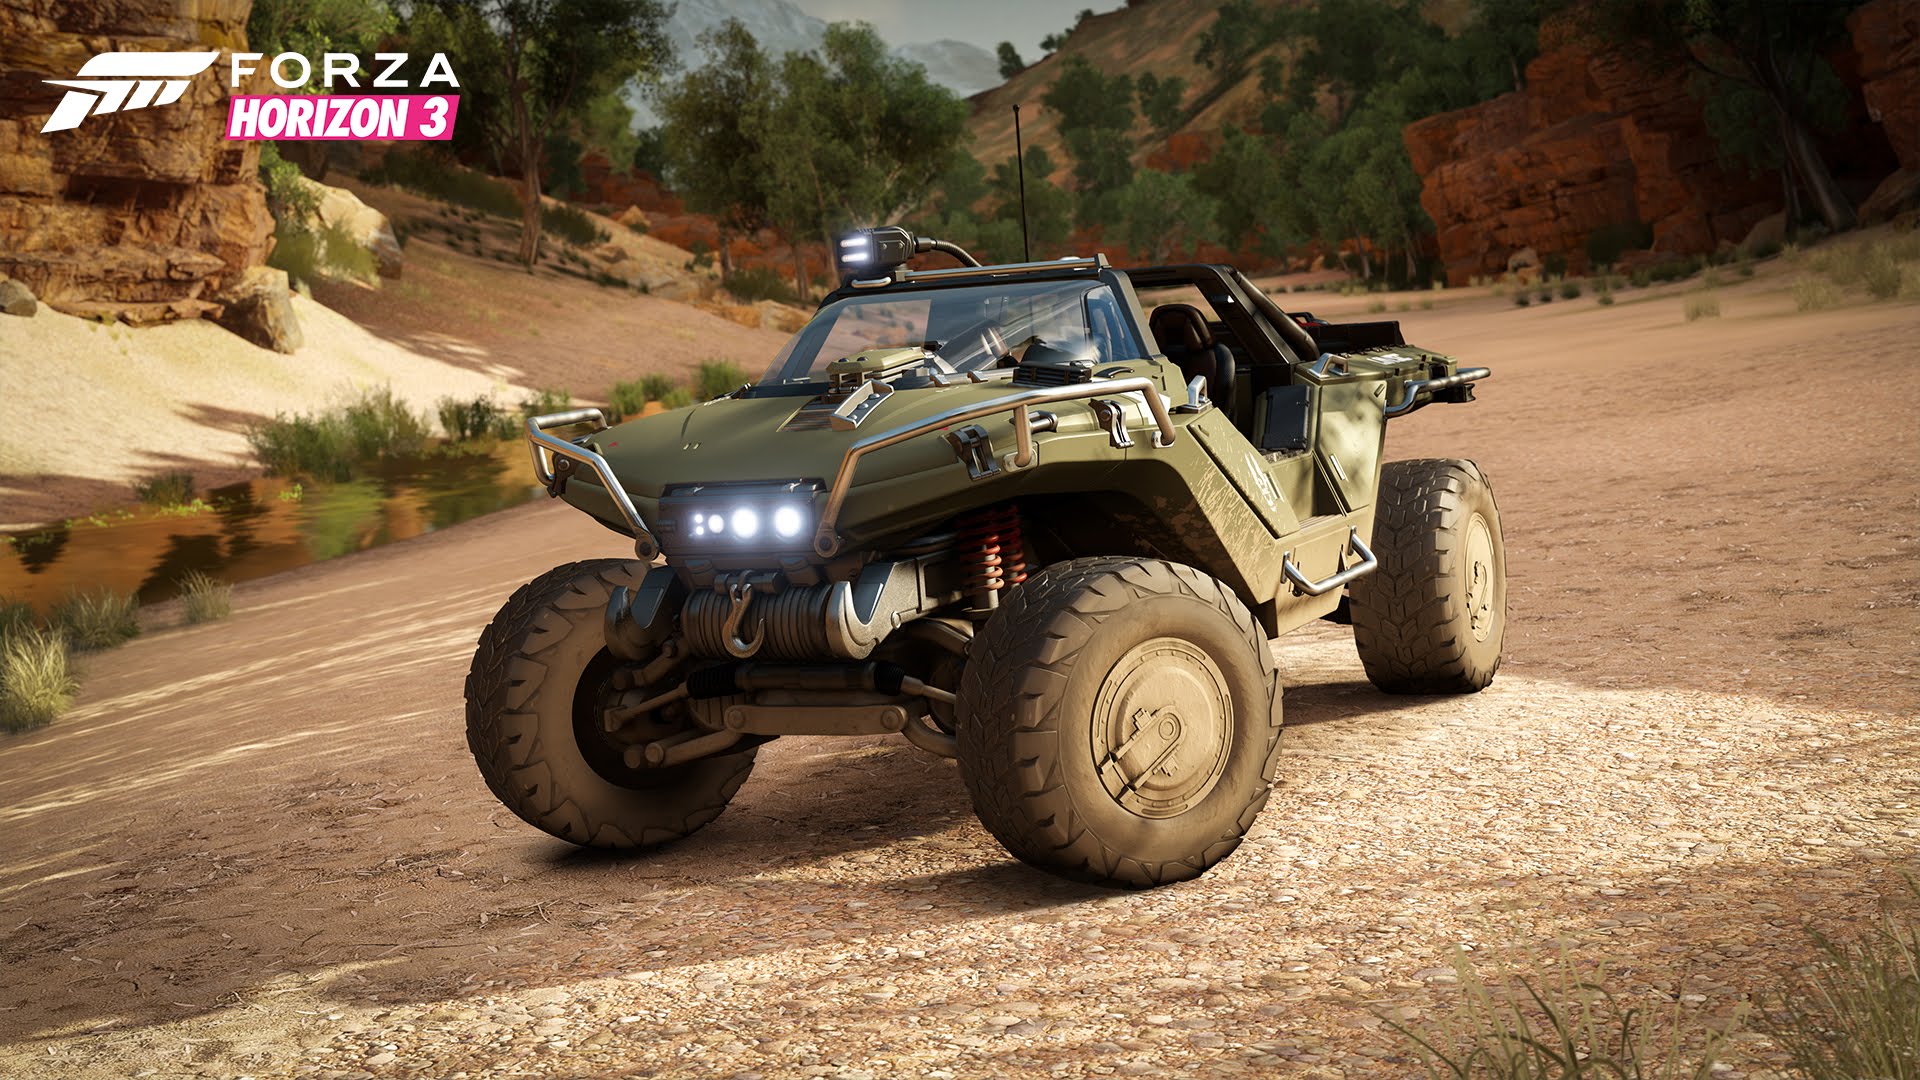 Forza Horizon 3 the First Game to Feature the Warthog Outside of Halo